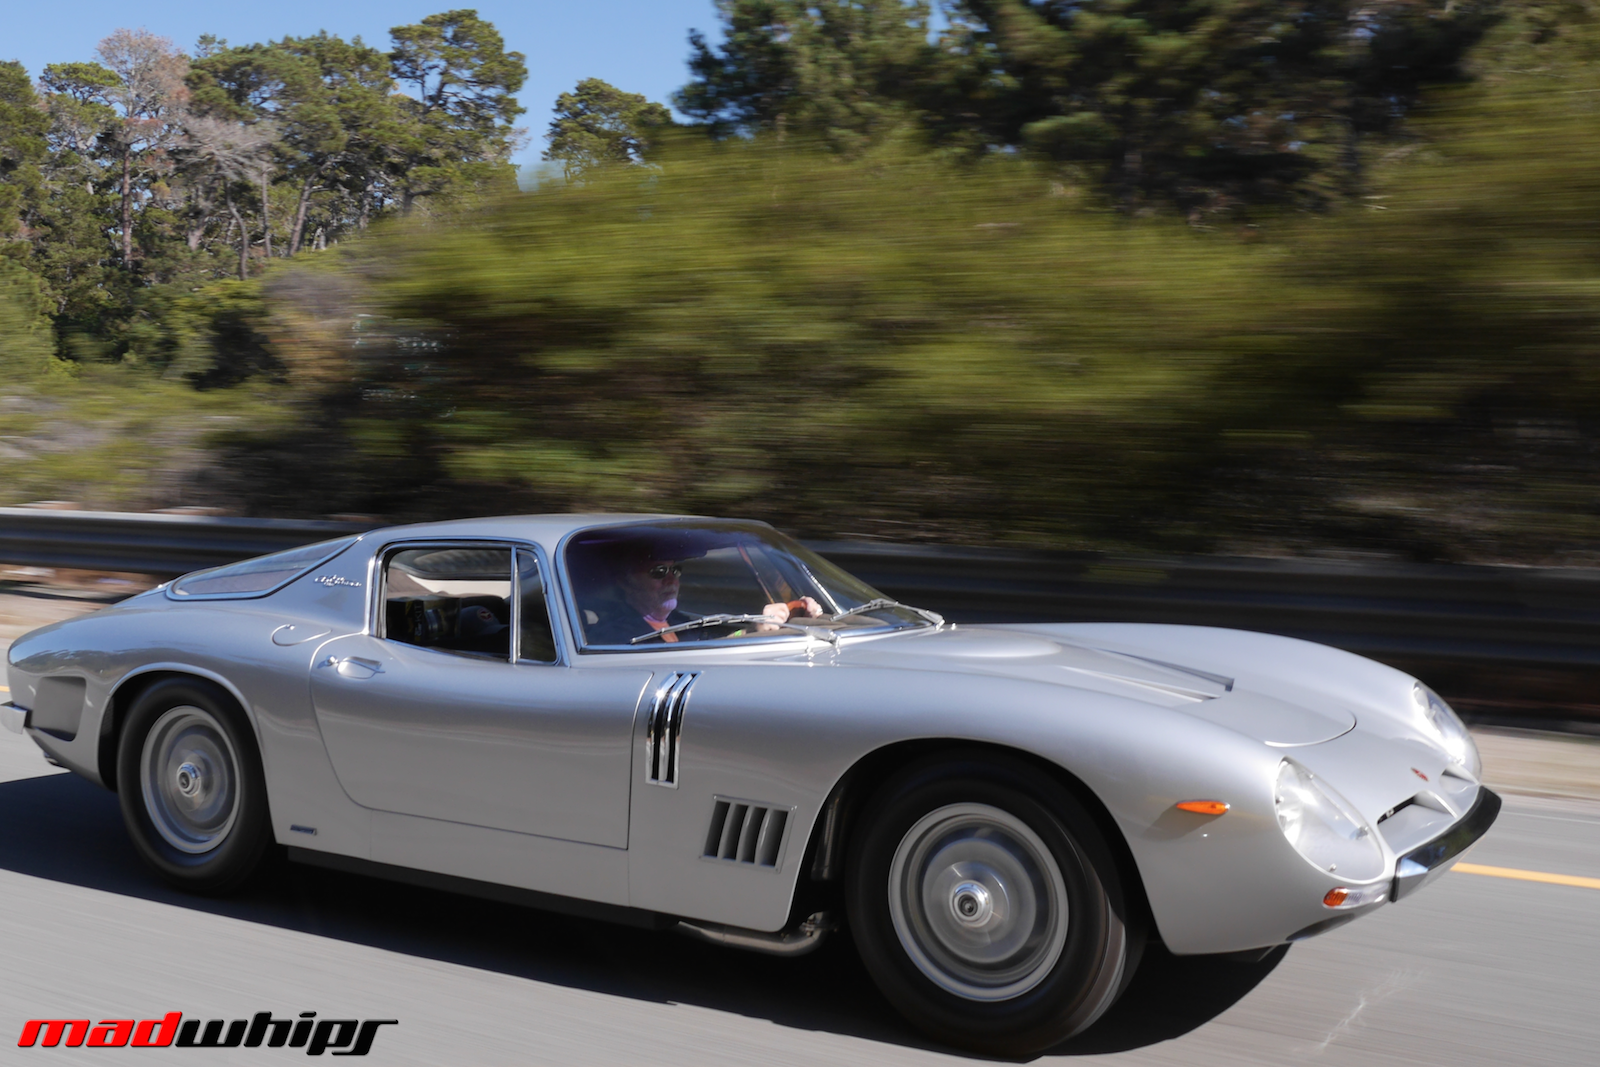 More Photos From Monterey Car Week